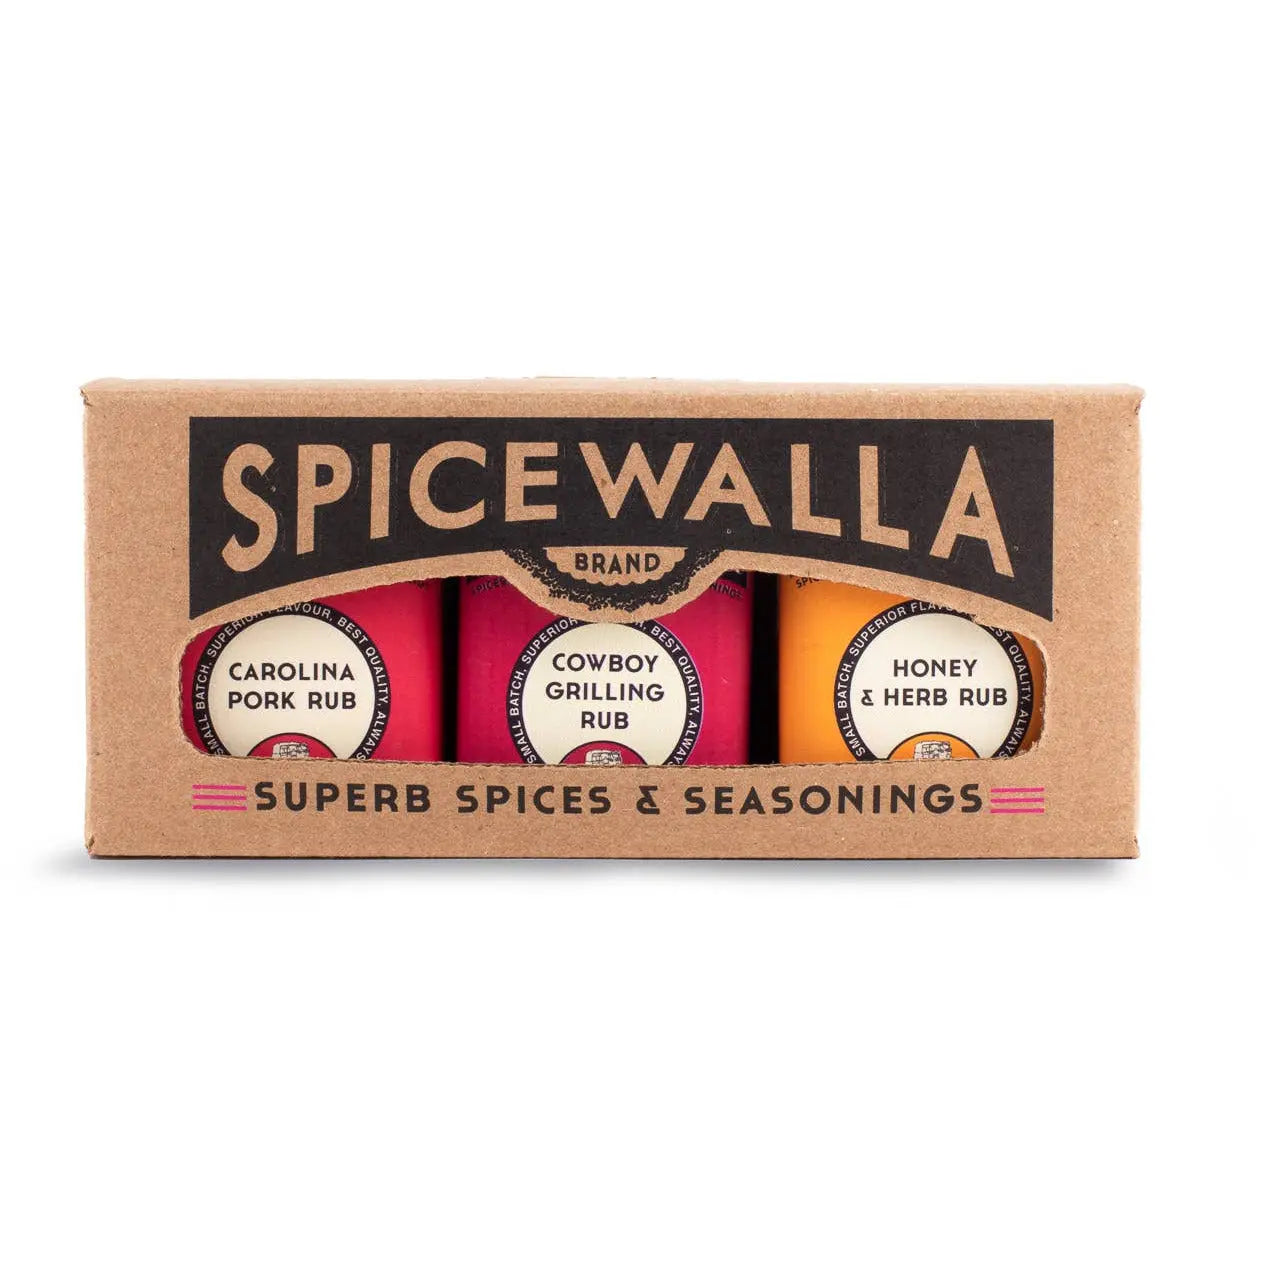 Grill & Roast 3 Pack Gift Collection Spicewalla